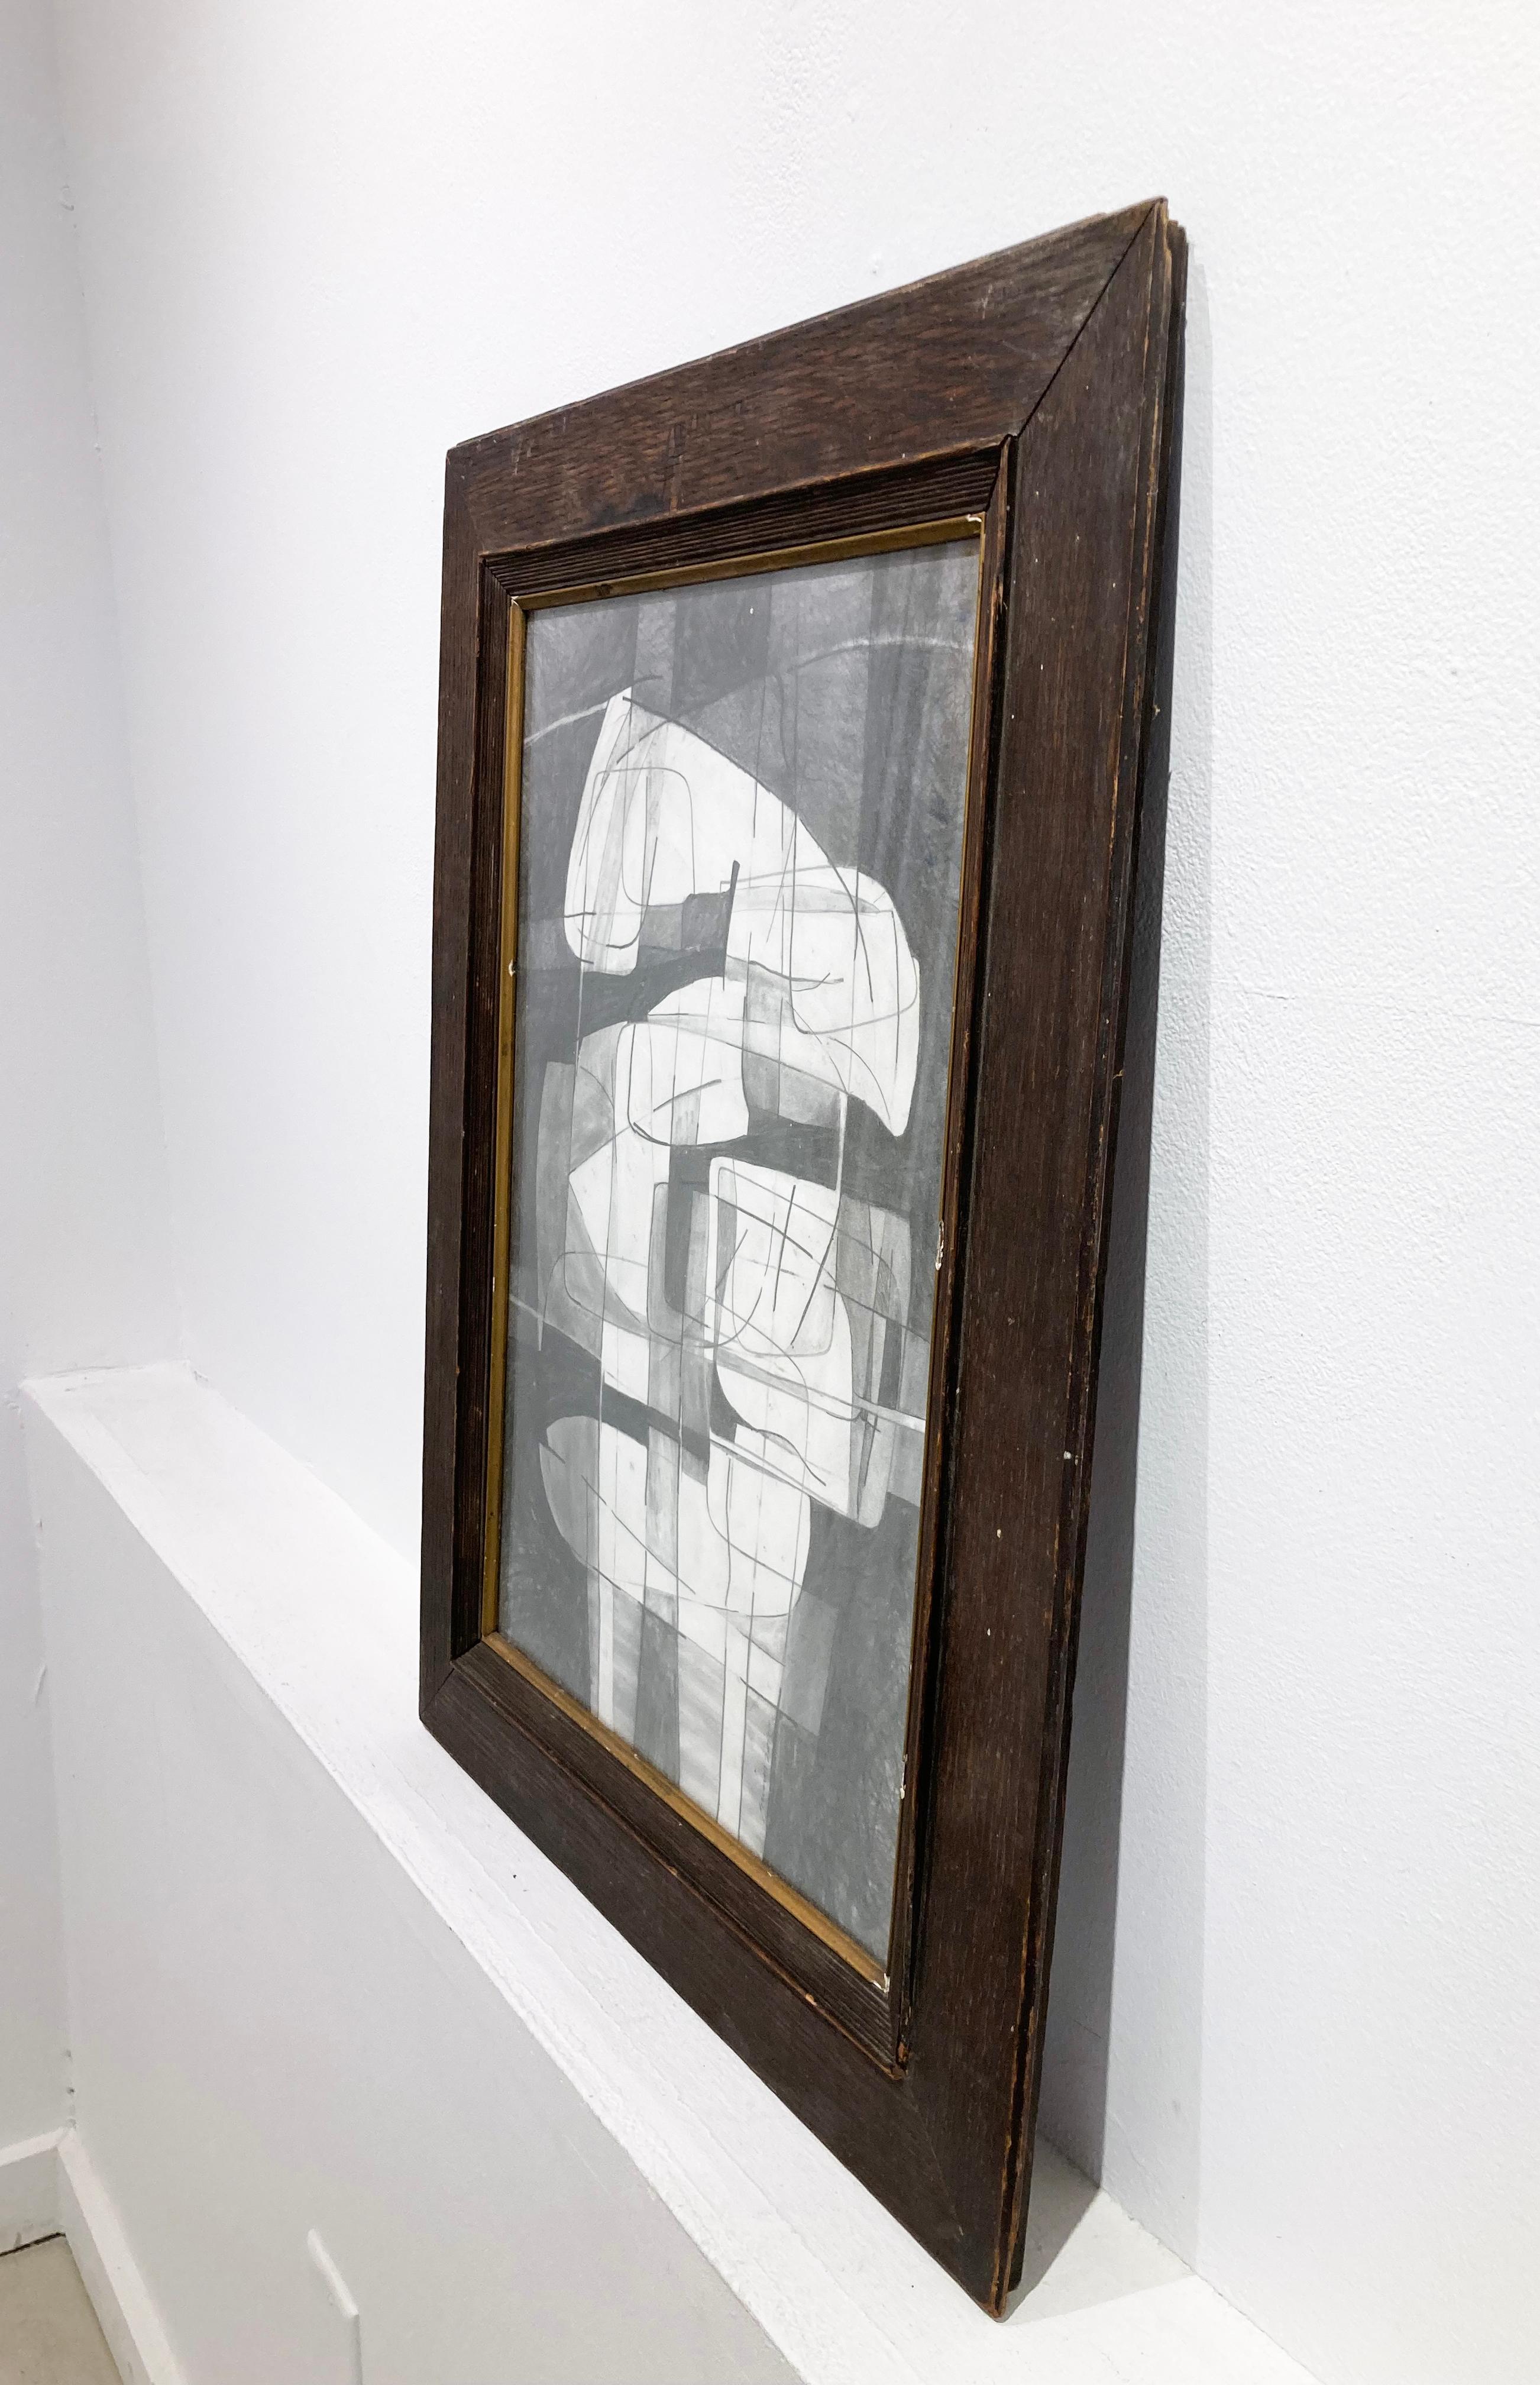 Sutherland Project IX: Cubist Abstract Graphite Drawing with Antique Frame  - Art by David Dew Bruner